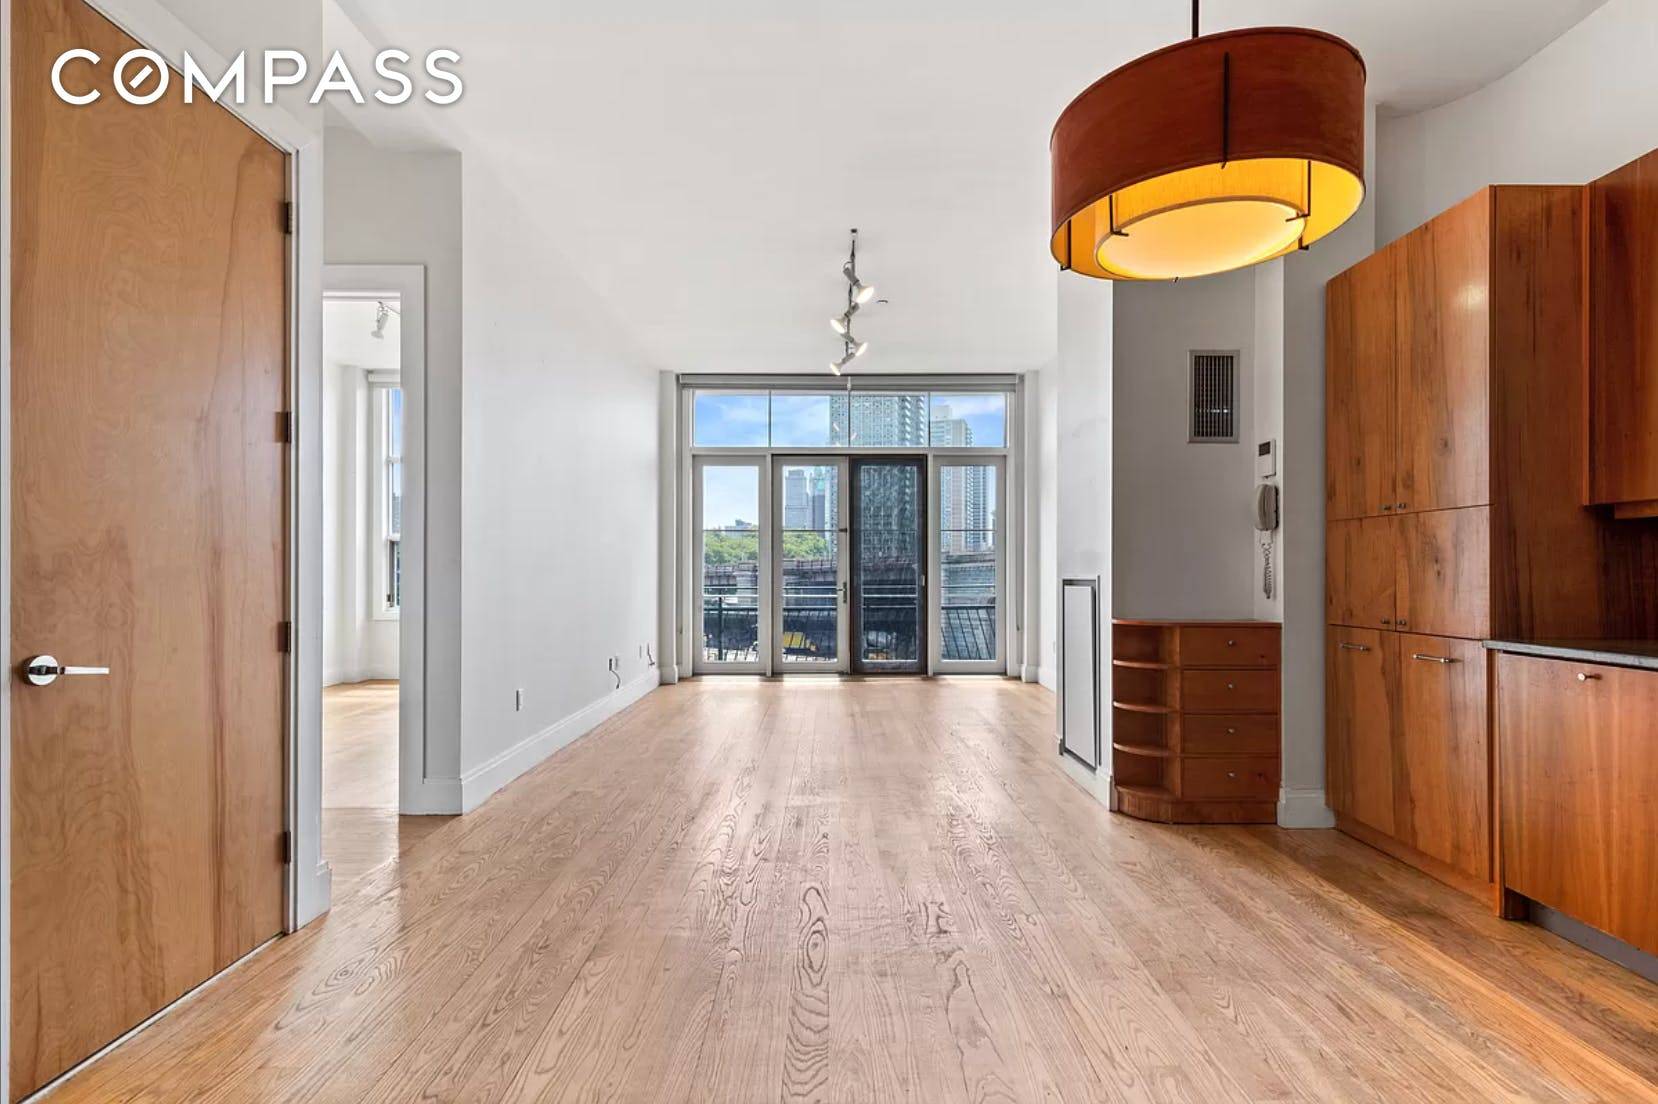 New No Fee Dumbo Loft ! Enjoy the splendor in this spectacularly bright two bedroom, two bathroom condominium with private balcony.